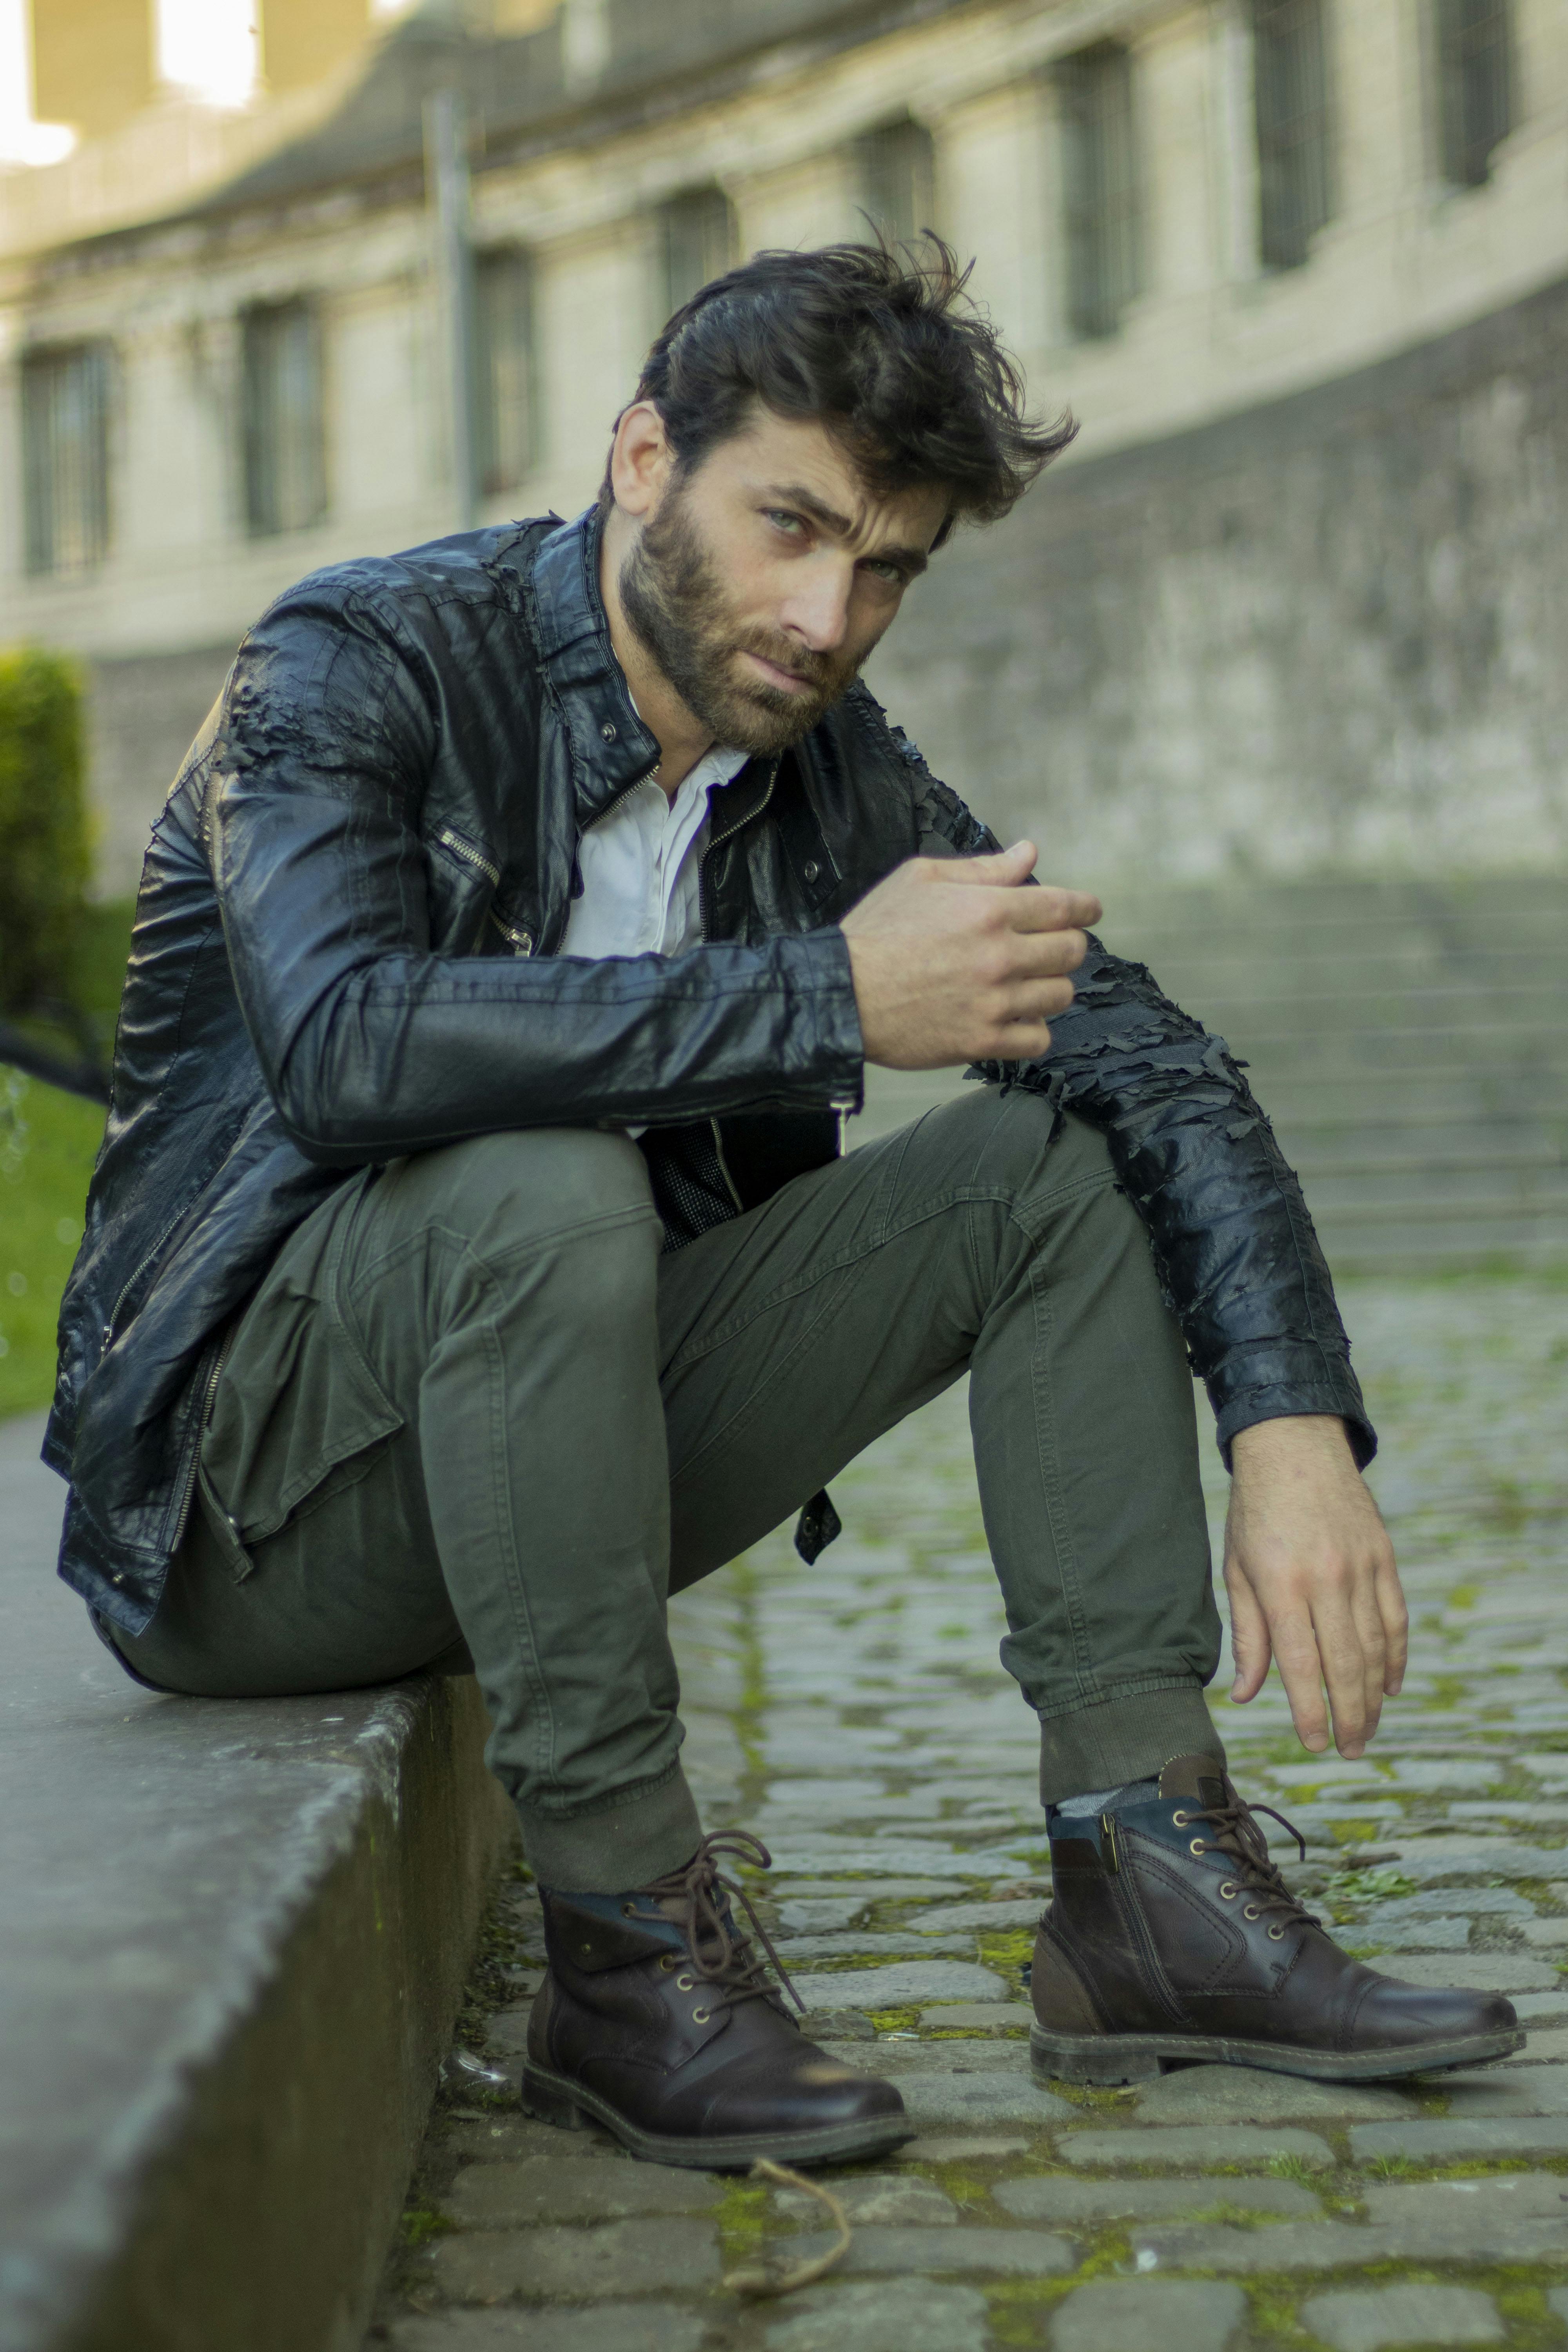 Leather Jacket Model Male Photos, Download The BEST Free Leather Jacket ...